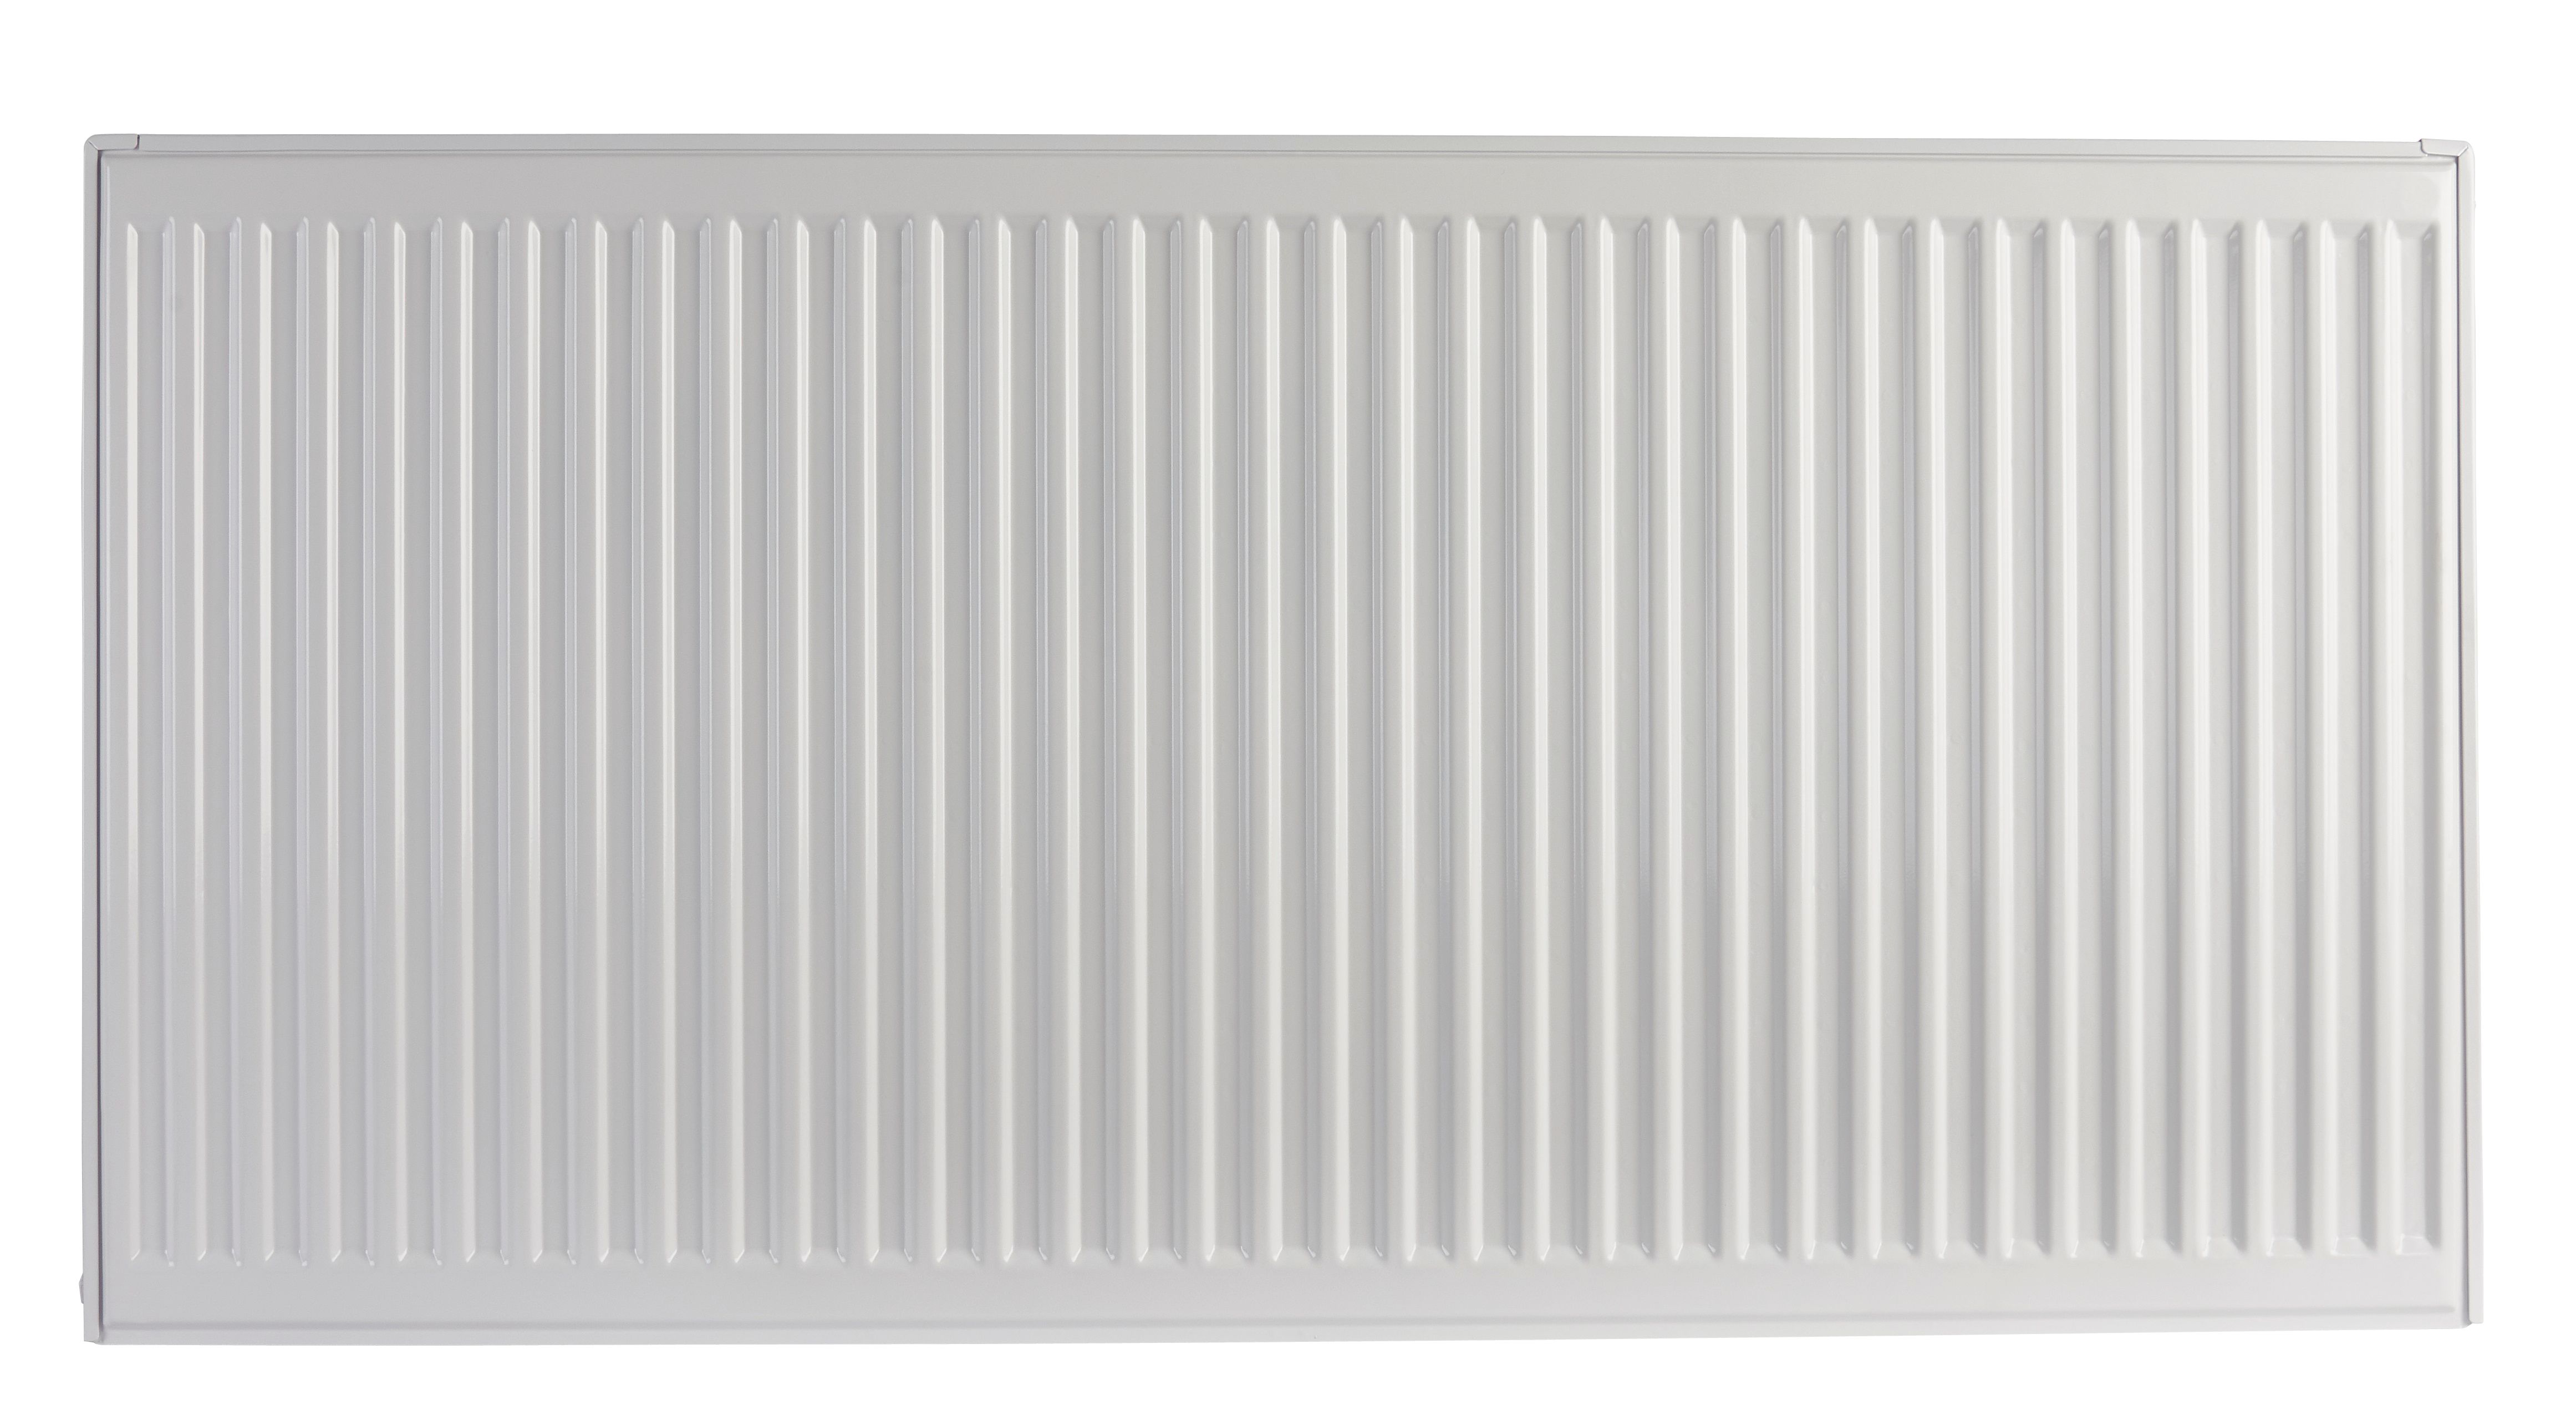 Image of Homeline by Stelrad 700 x 1600mm Type 11 Single Panel Single Convector Radiator